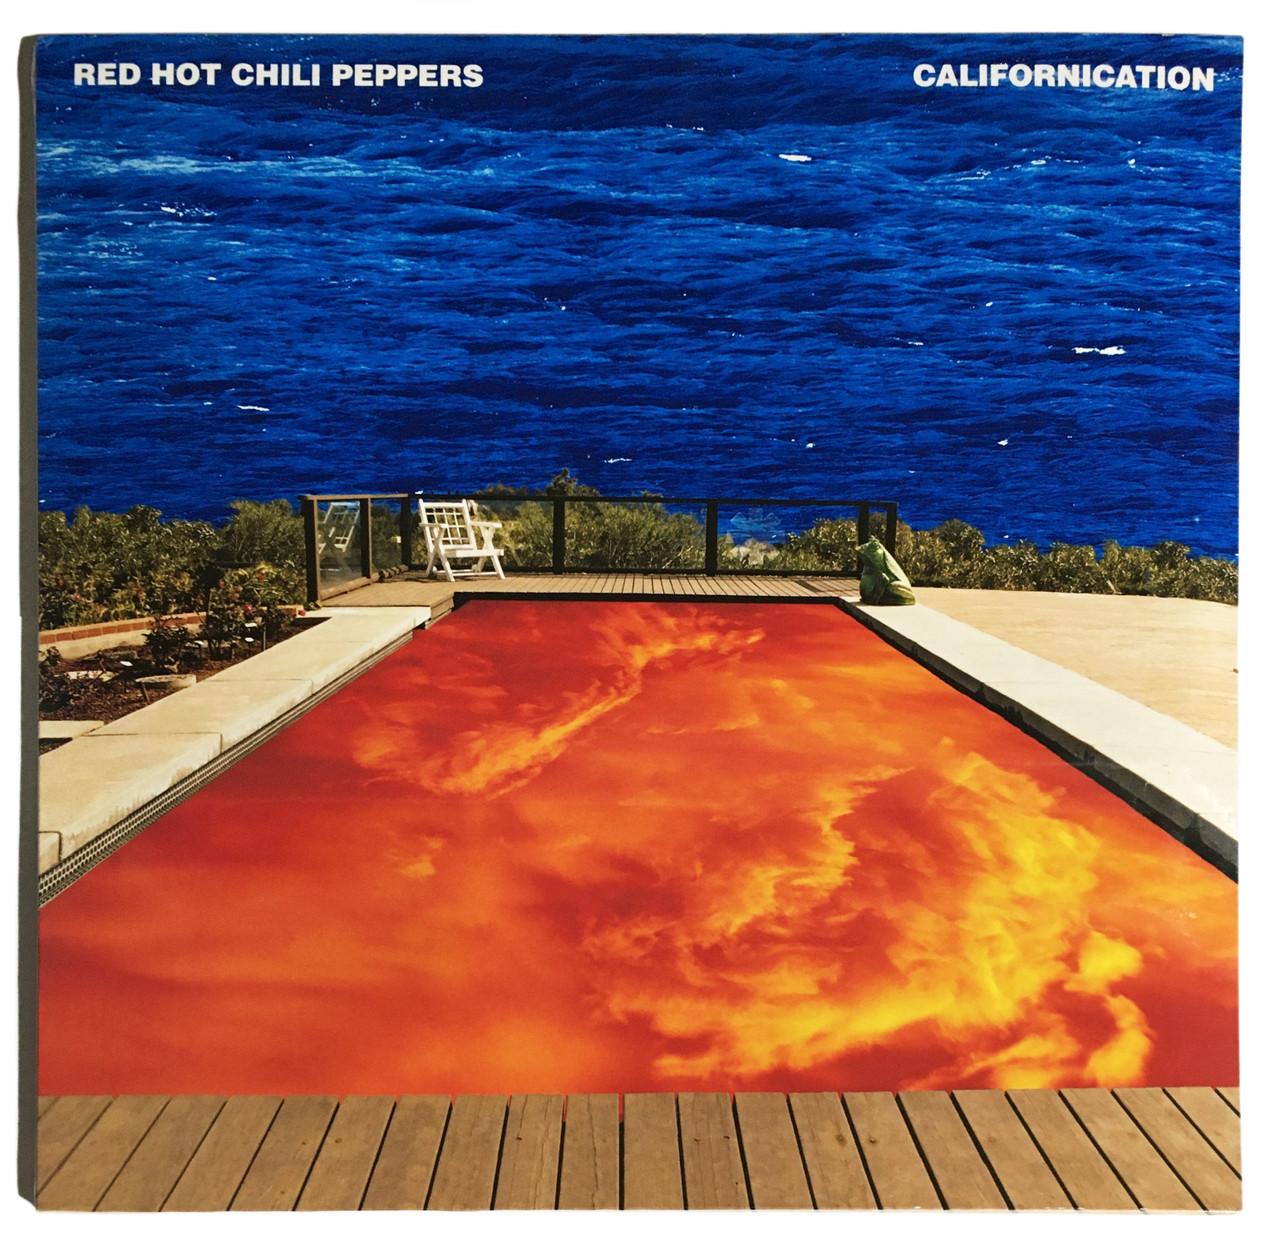 Red Hot Chili Peppers 'Californication' DOUBLE LP Vinyl